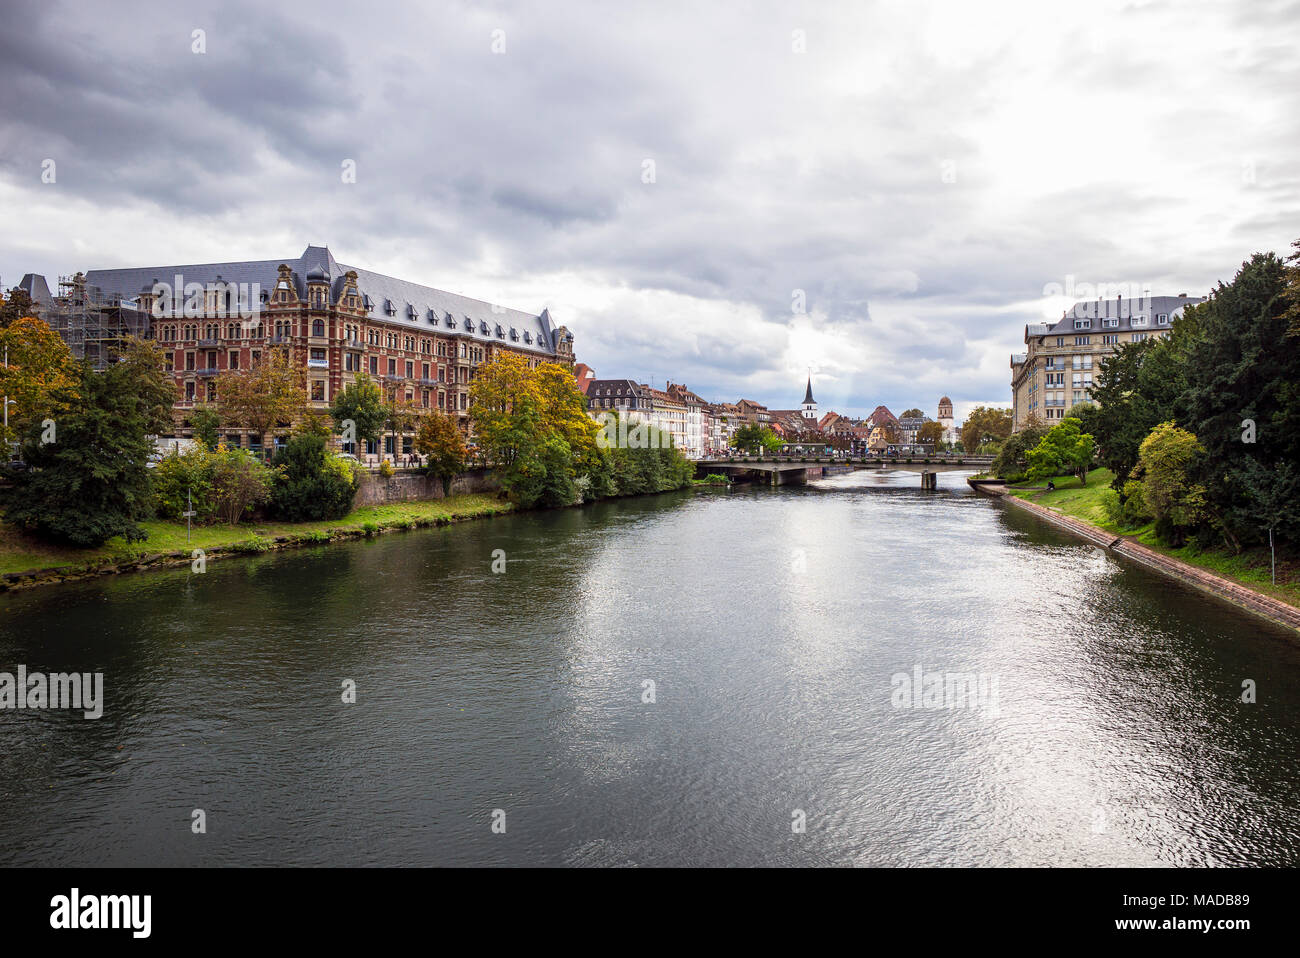 Gallia building, student residence, dorm accomodation, Ill river, waterfront houses perspective, Strasbourg, Alsace, France, Europe, Stock Photo